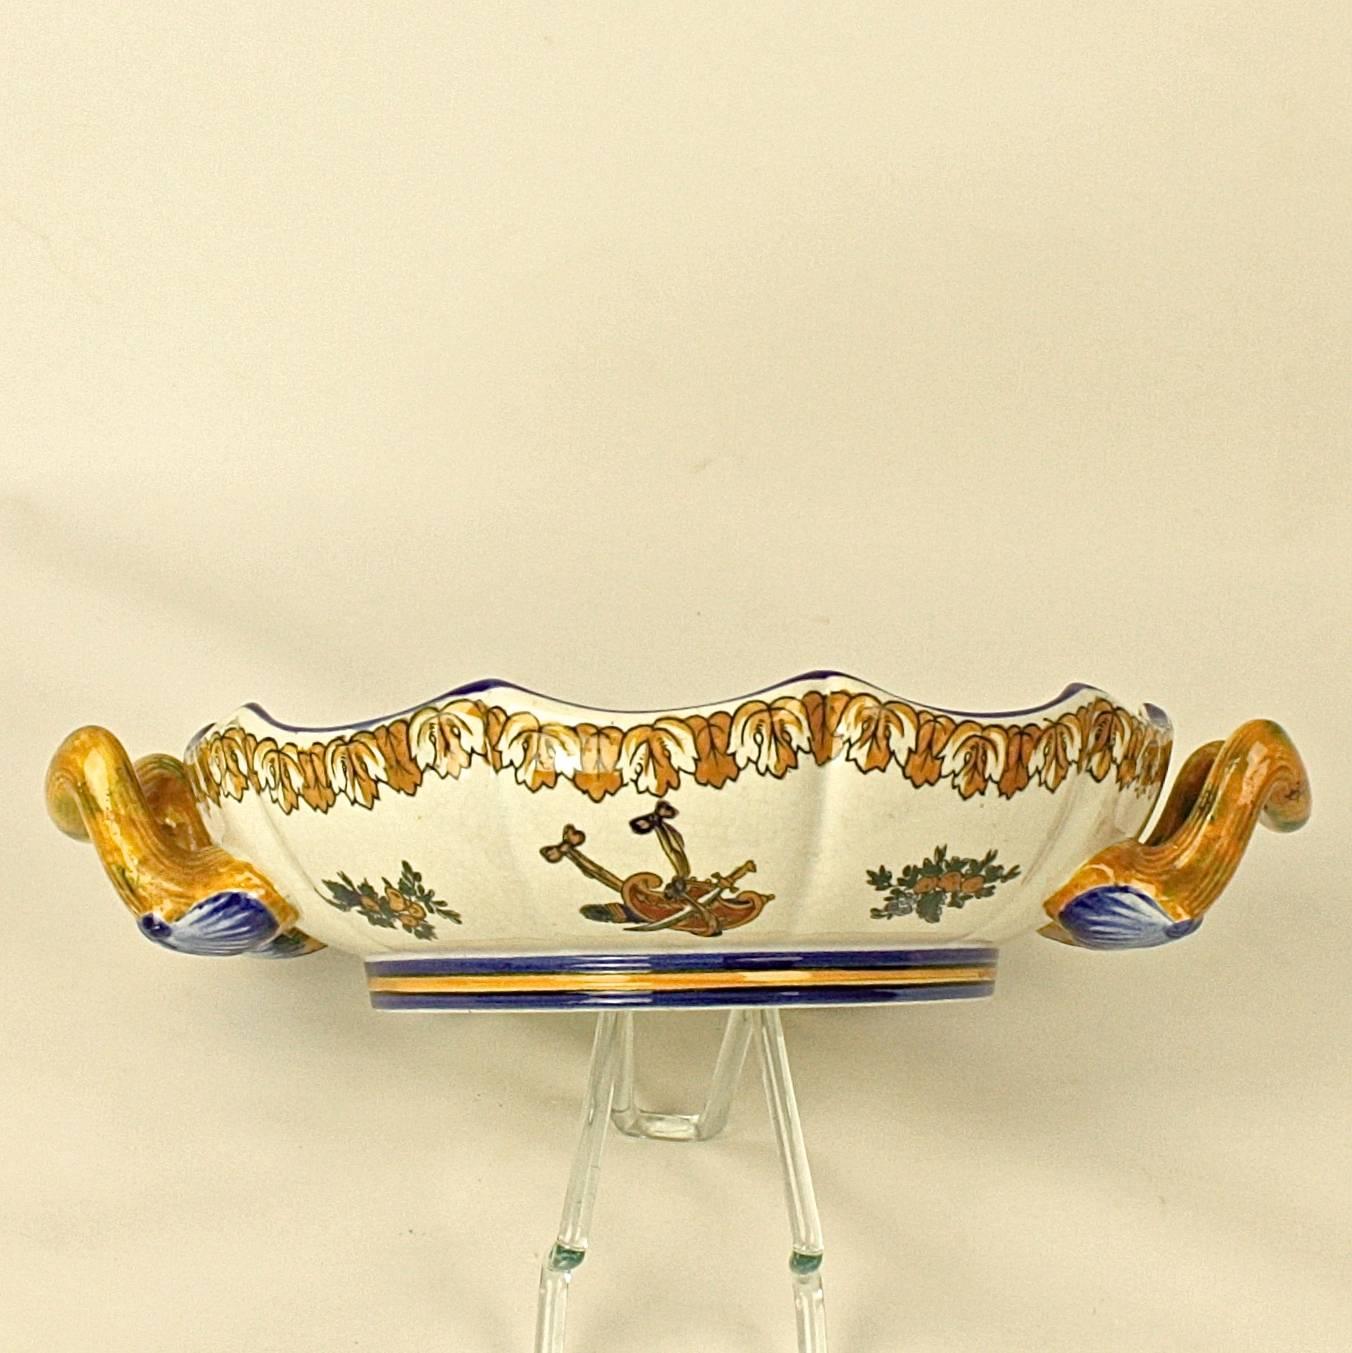 Glazed Earthenware Two-Handled Bowl of the 'Faiencerie de Gien' In Good Condition For Sale In Berlin, DE